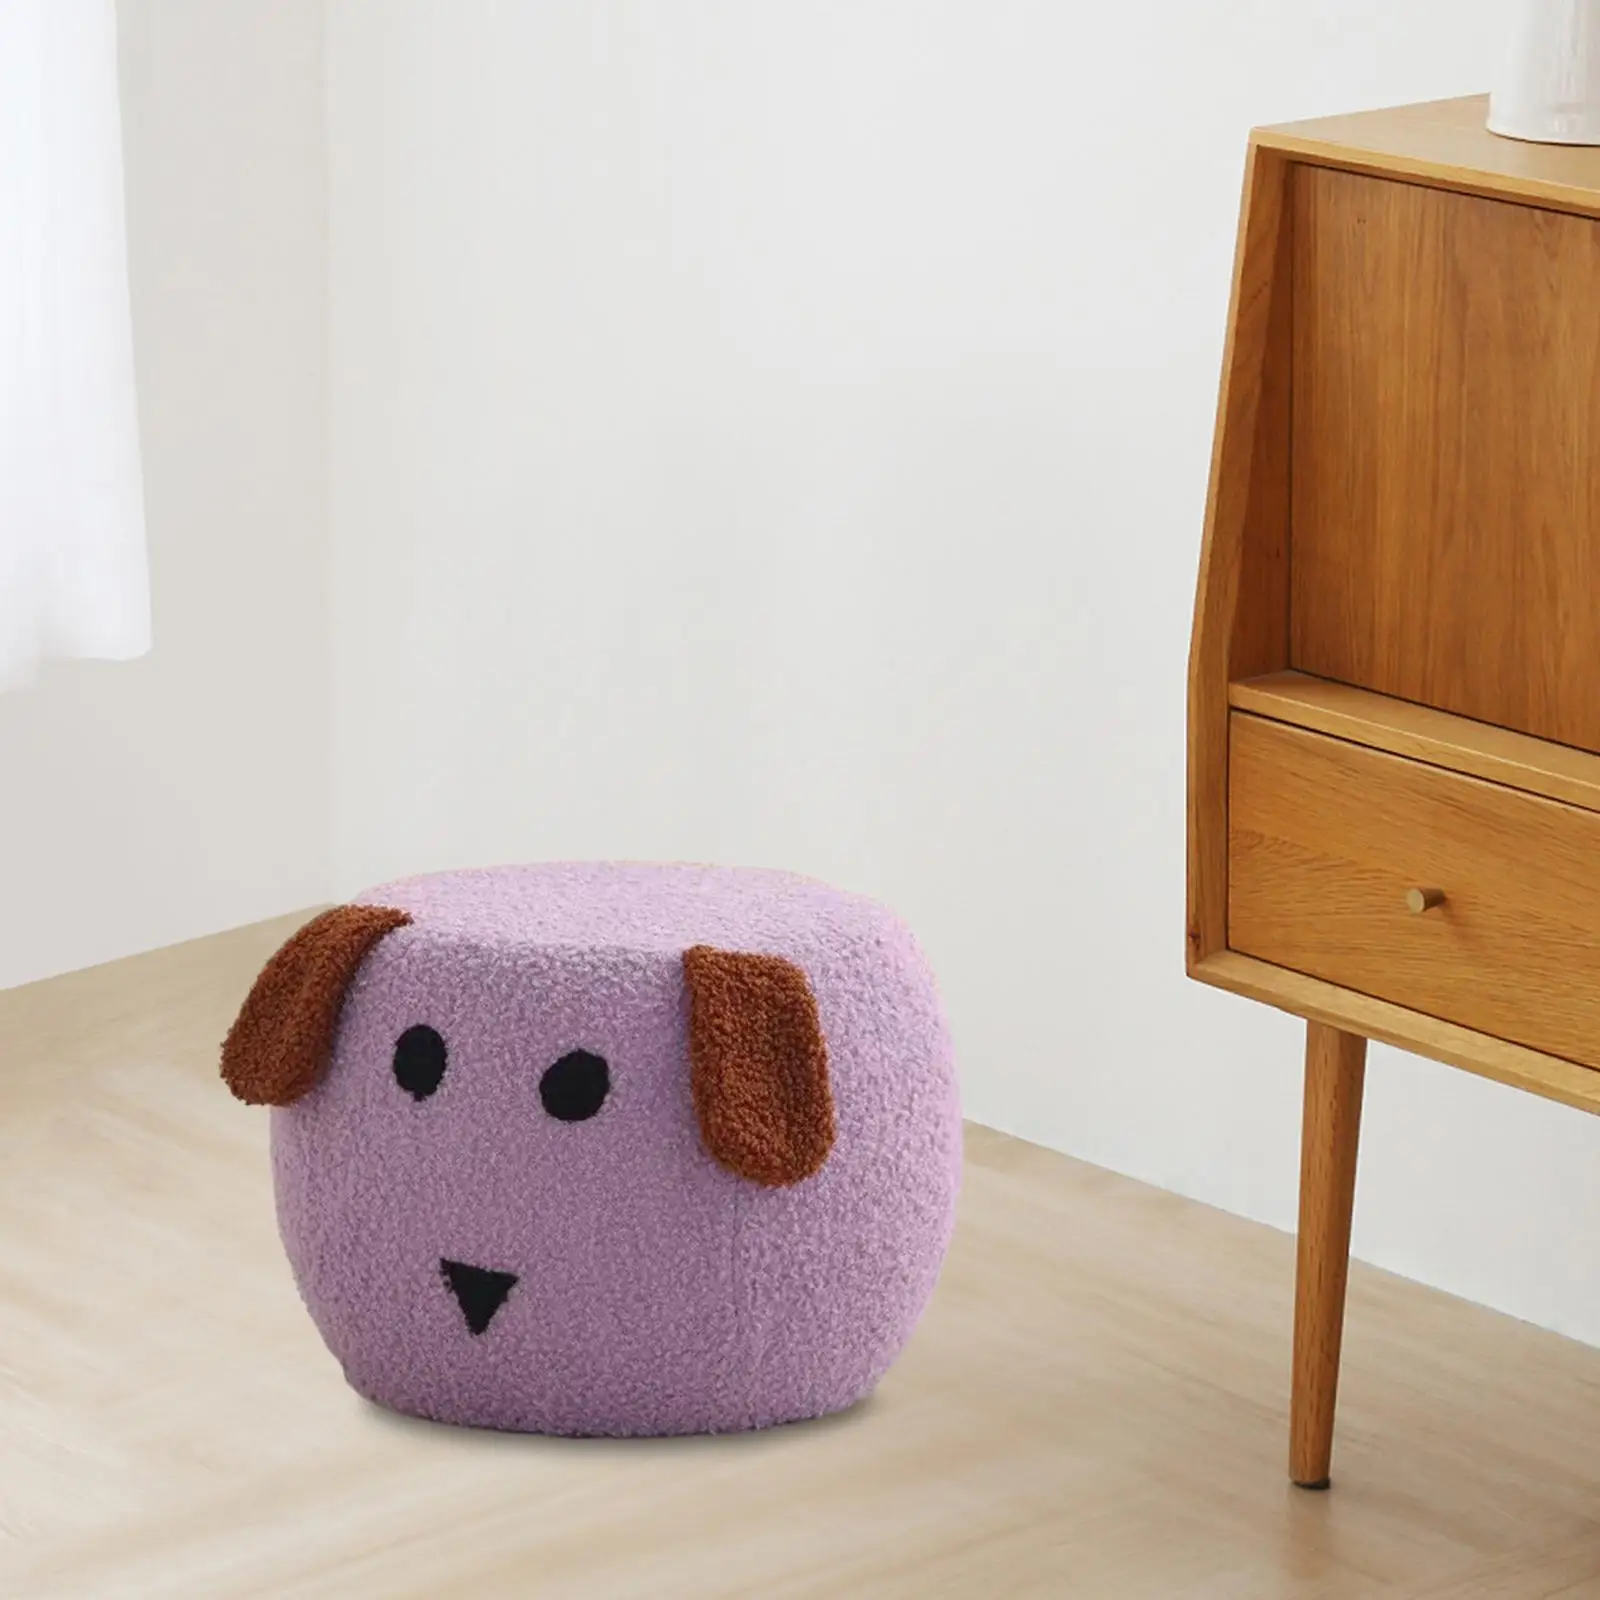 Small Footstool Cute Dog Shape Footrest Stool Creative Stool Padded Seat Ottomans for Living Room Office Home Nursery Bedside